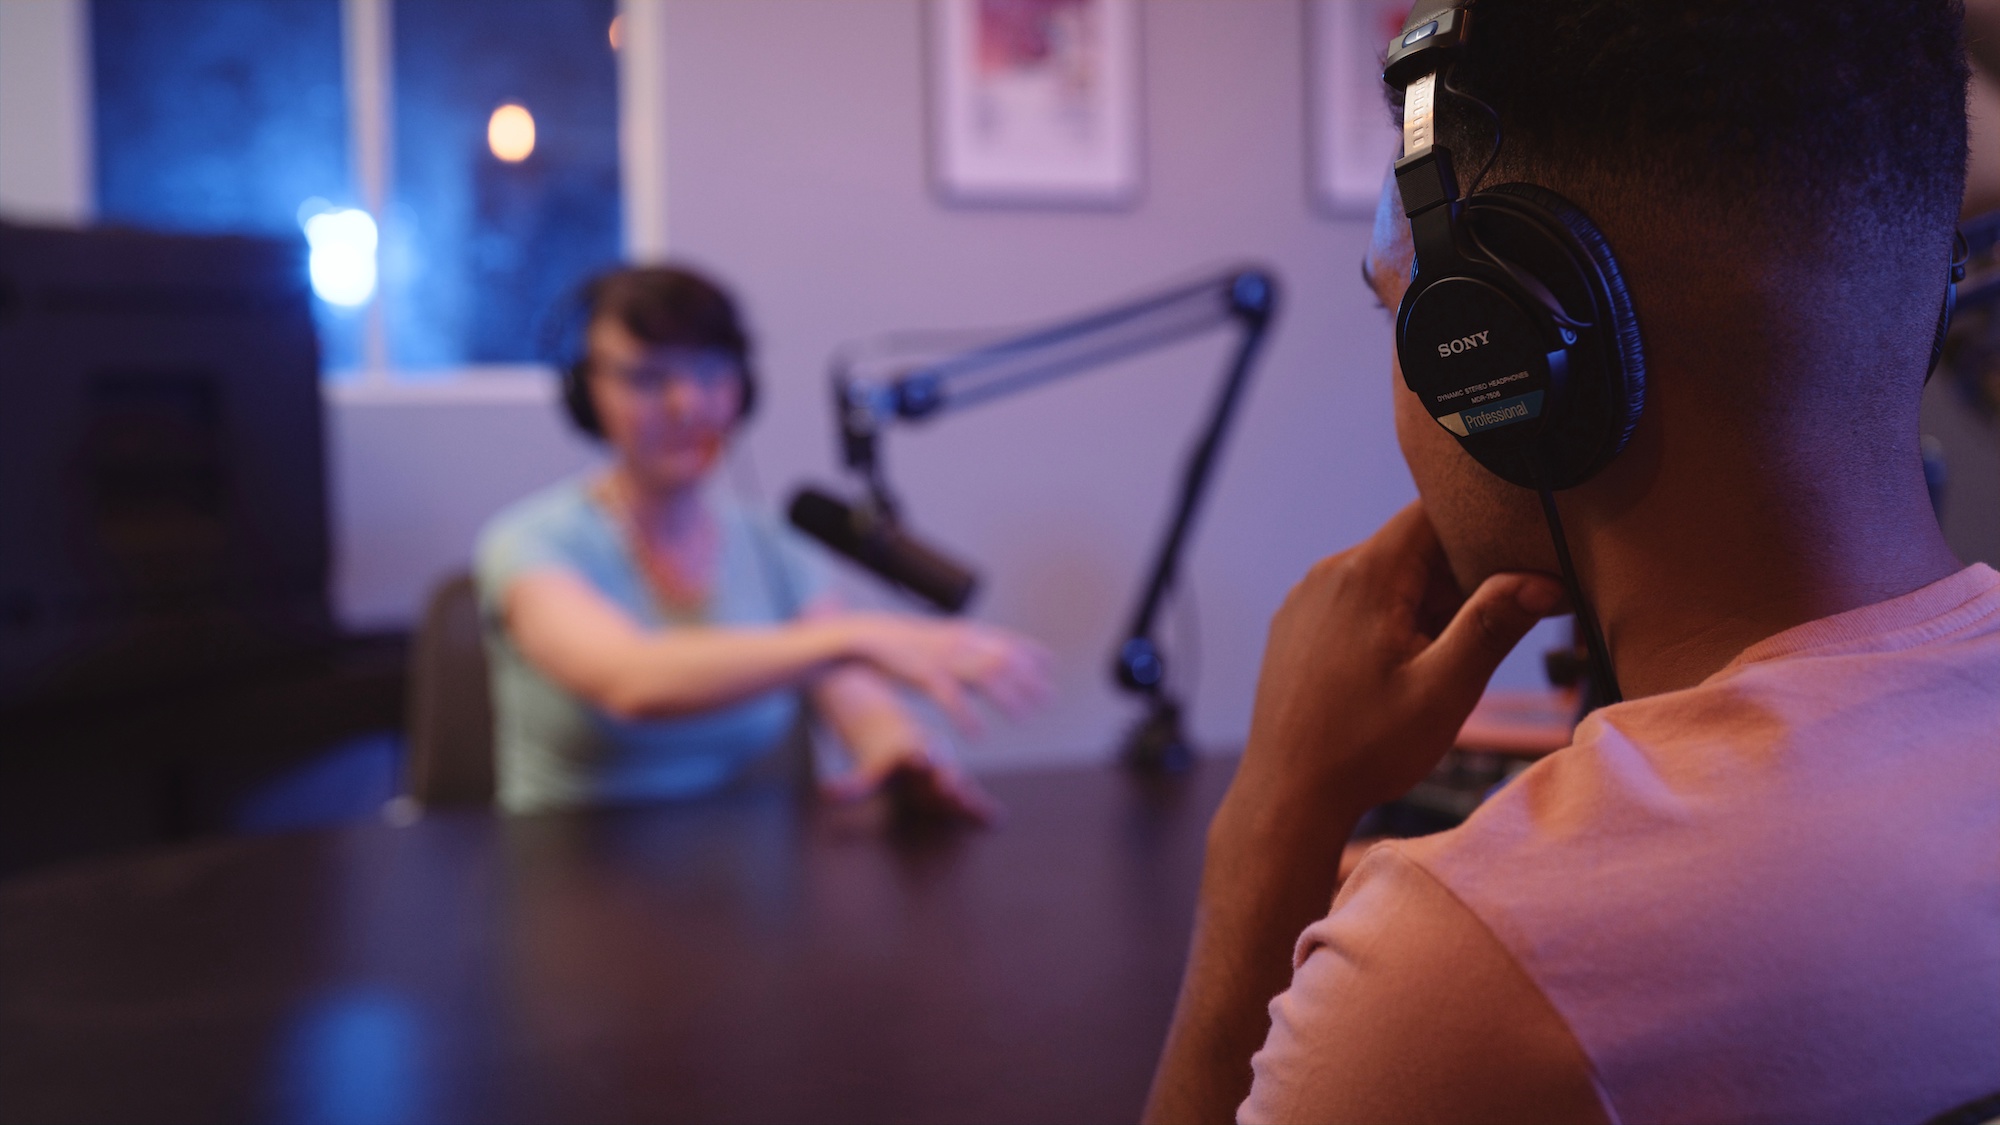 Fully Equipped Podcast Studio View from behind of man wearing black headphones being interviewed by a woman also wearing headphones